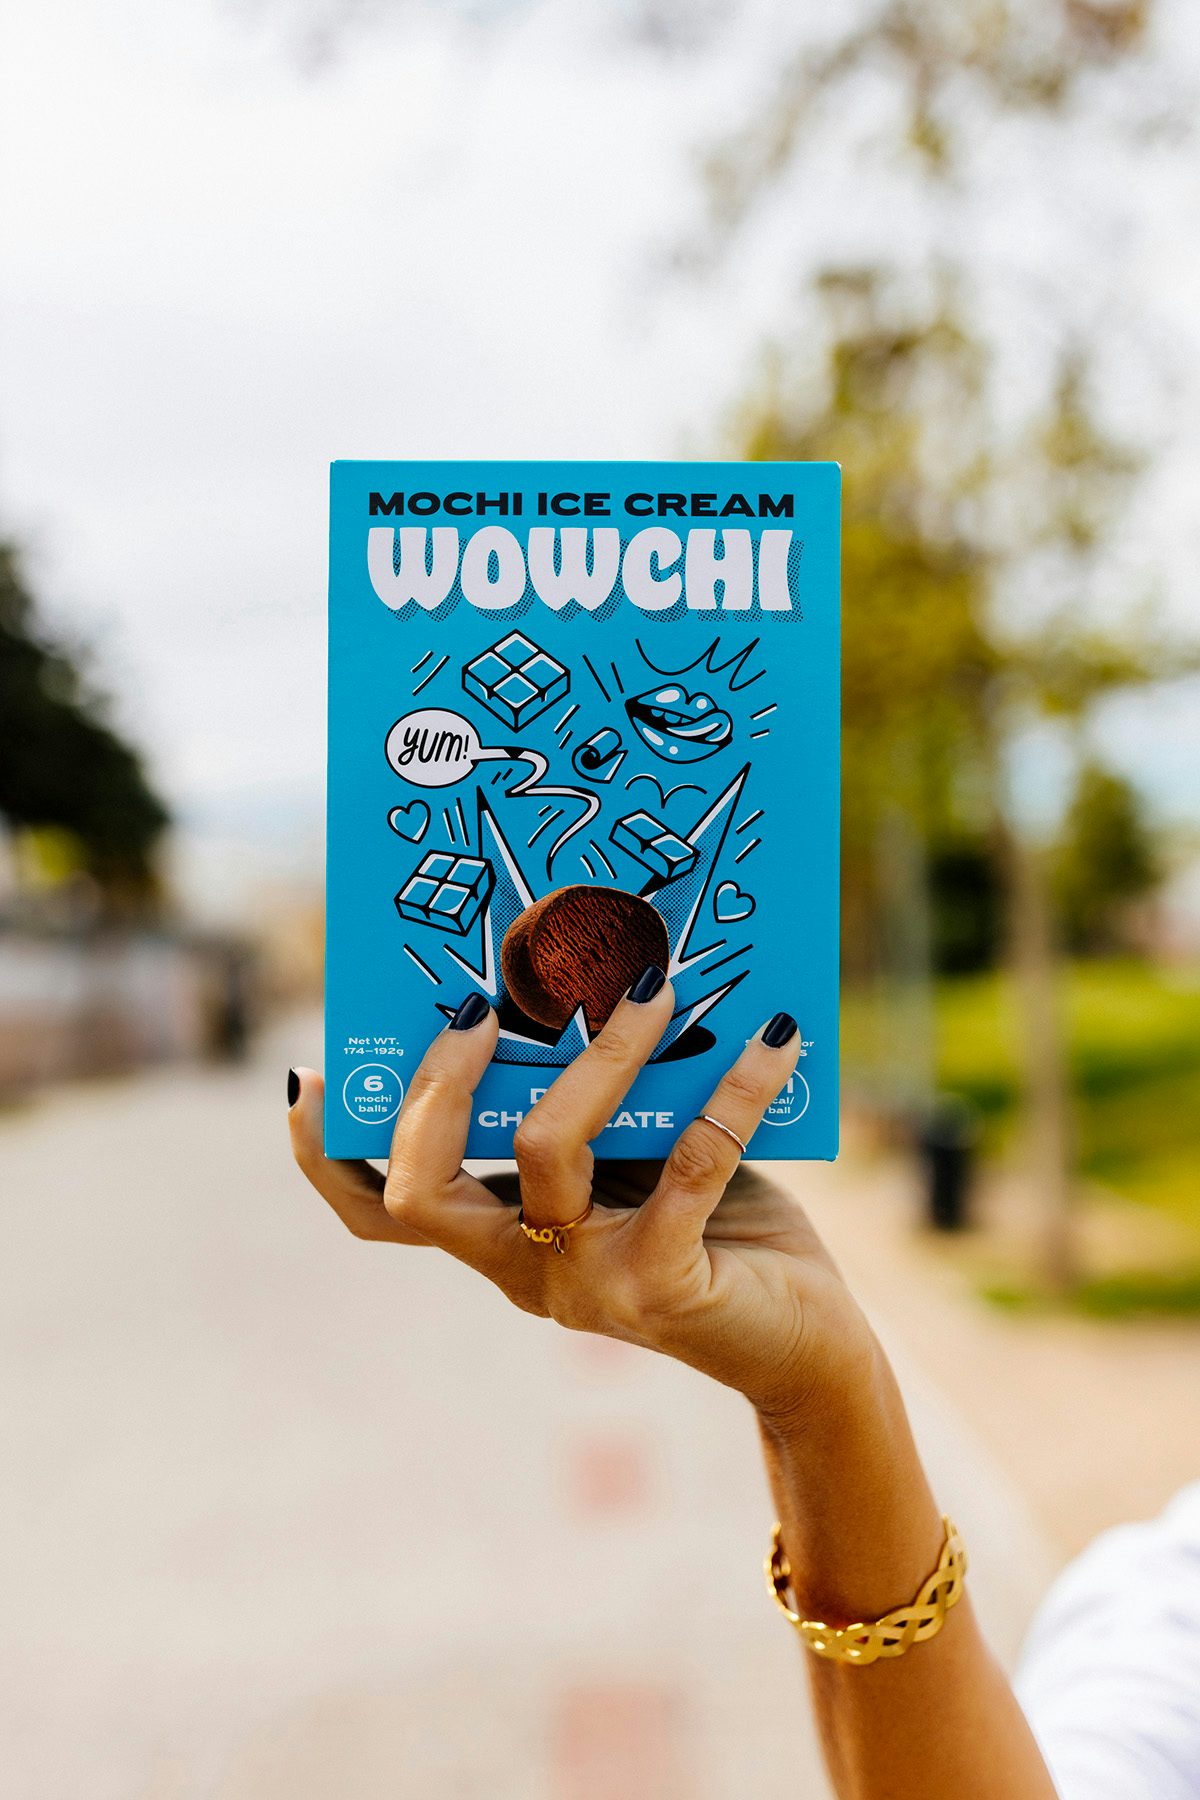 Image taken outside of a person's hand holding a blue box of Wowchi mochi with line illustrations and a photo of a mochi ball on the front of the packaging